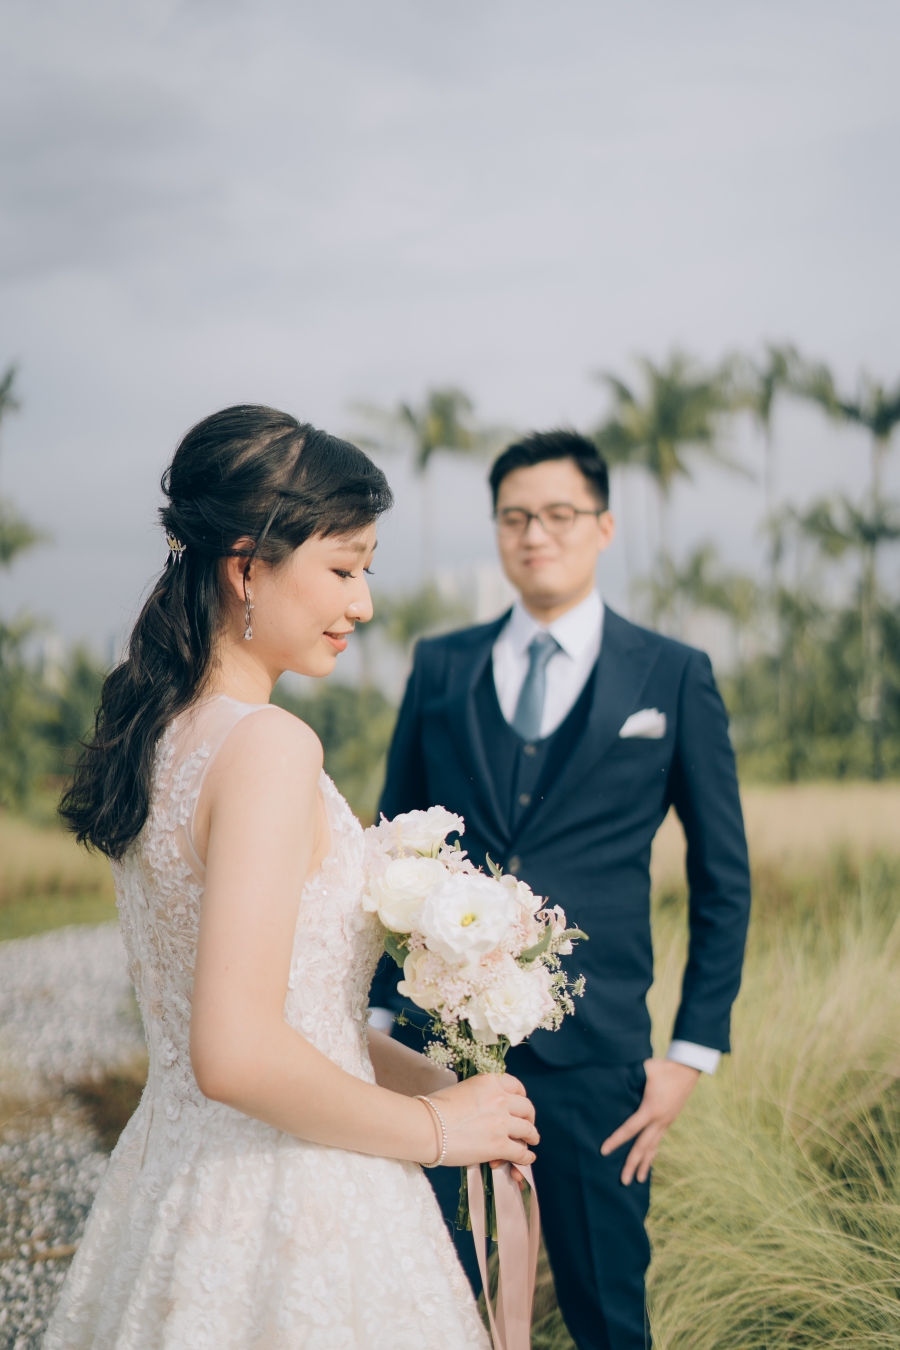 Singapore Casual And Pre-Wedding Photoshoot At Jurong Lake Gardens  by Sheereen on OneThreeOneFour 4